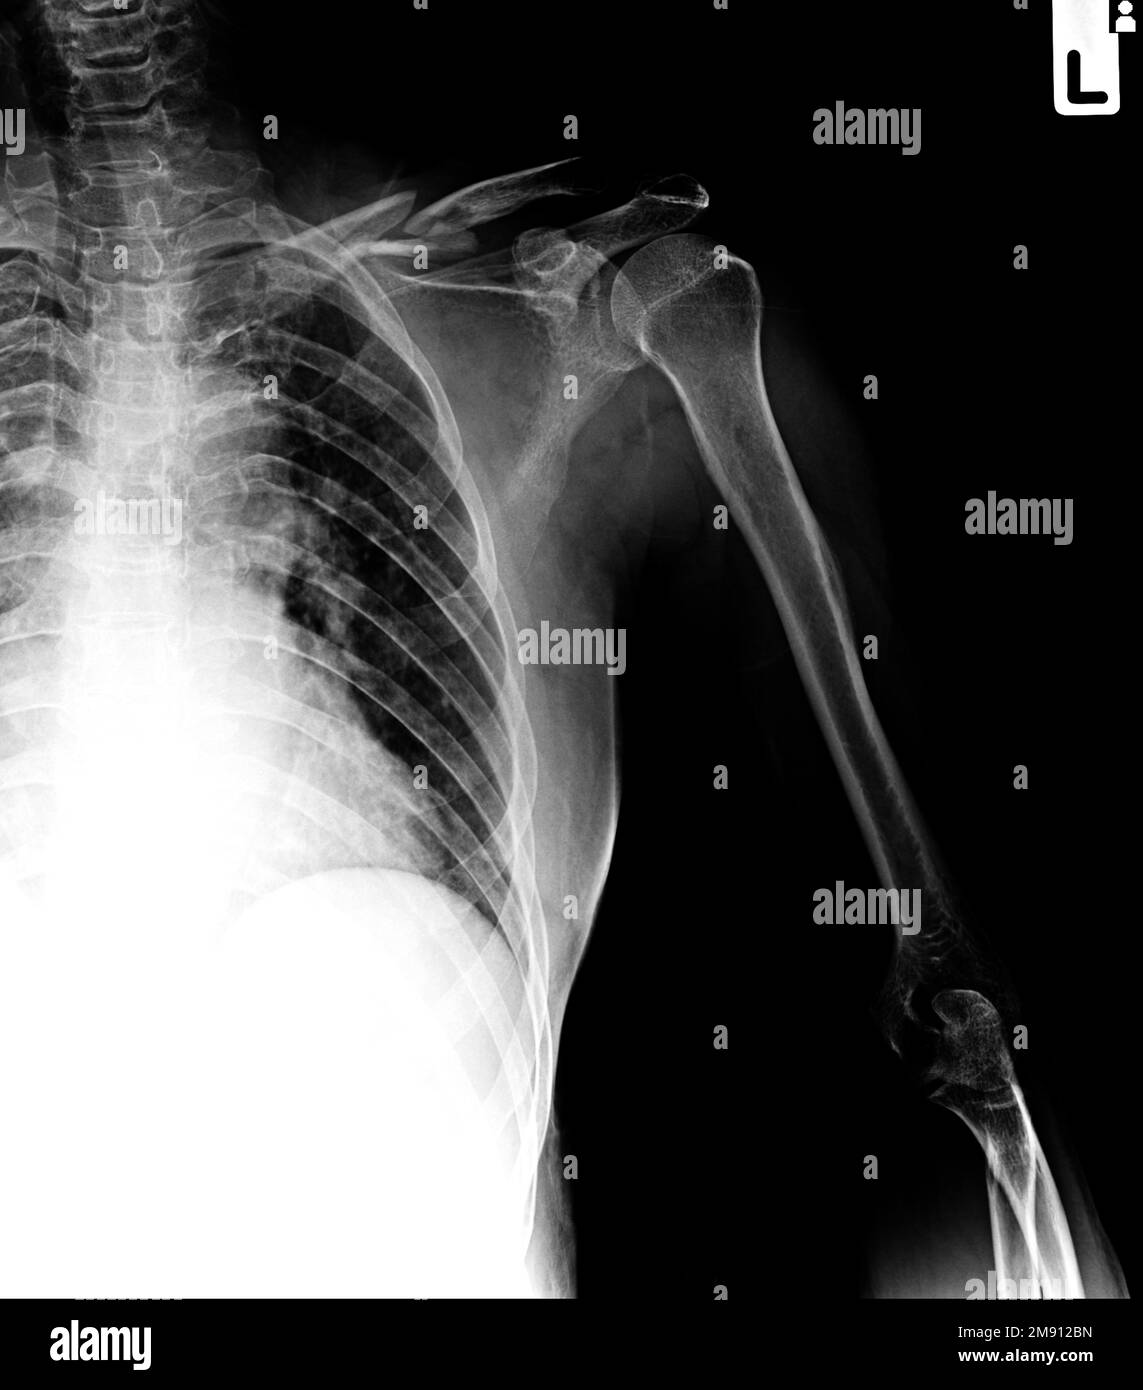 Film x-ray clavicle AP show fracture clavicle bone Stock Photo